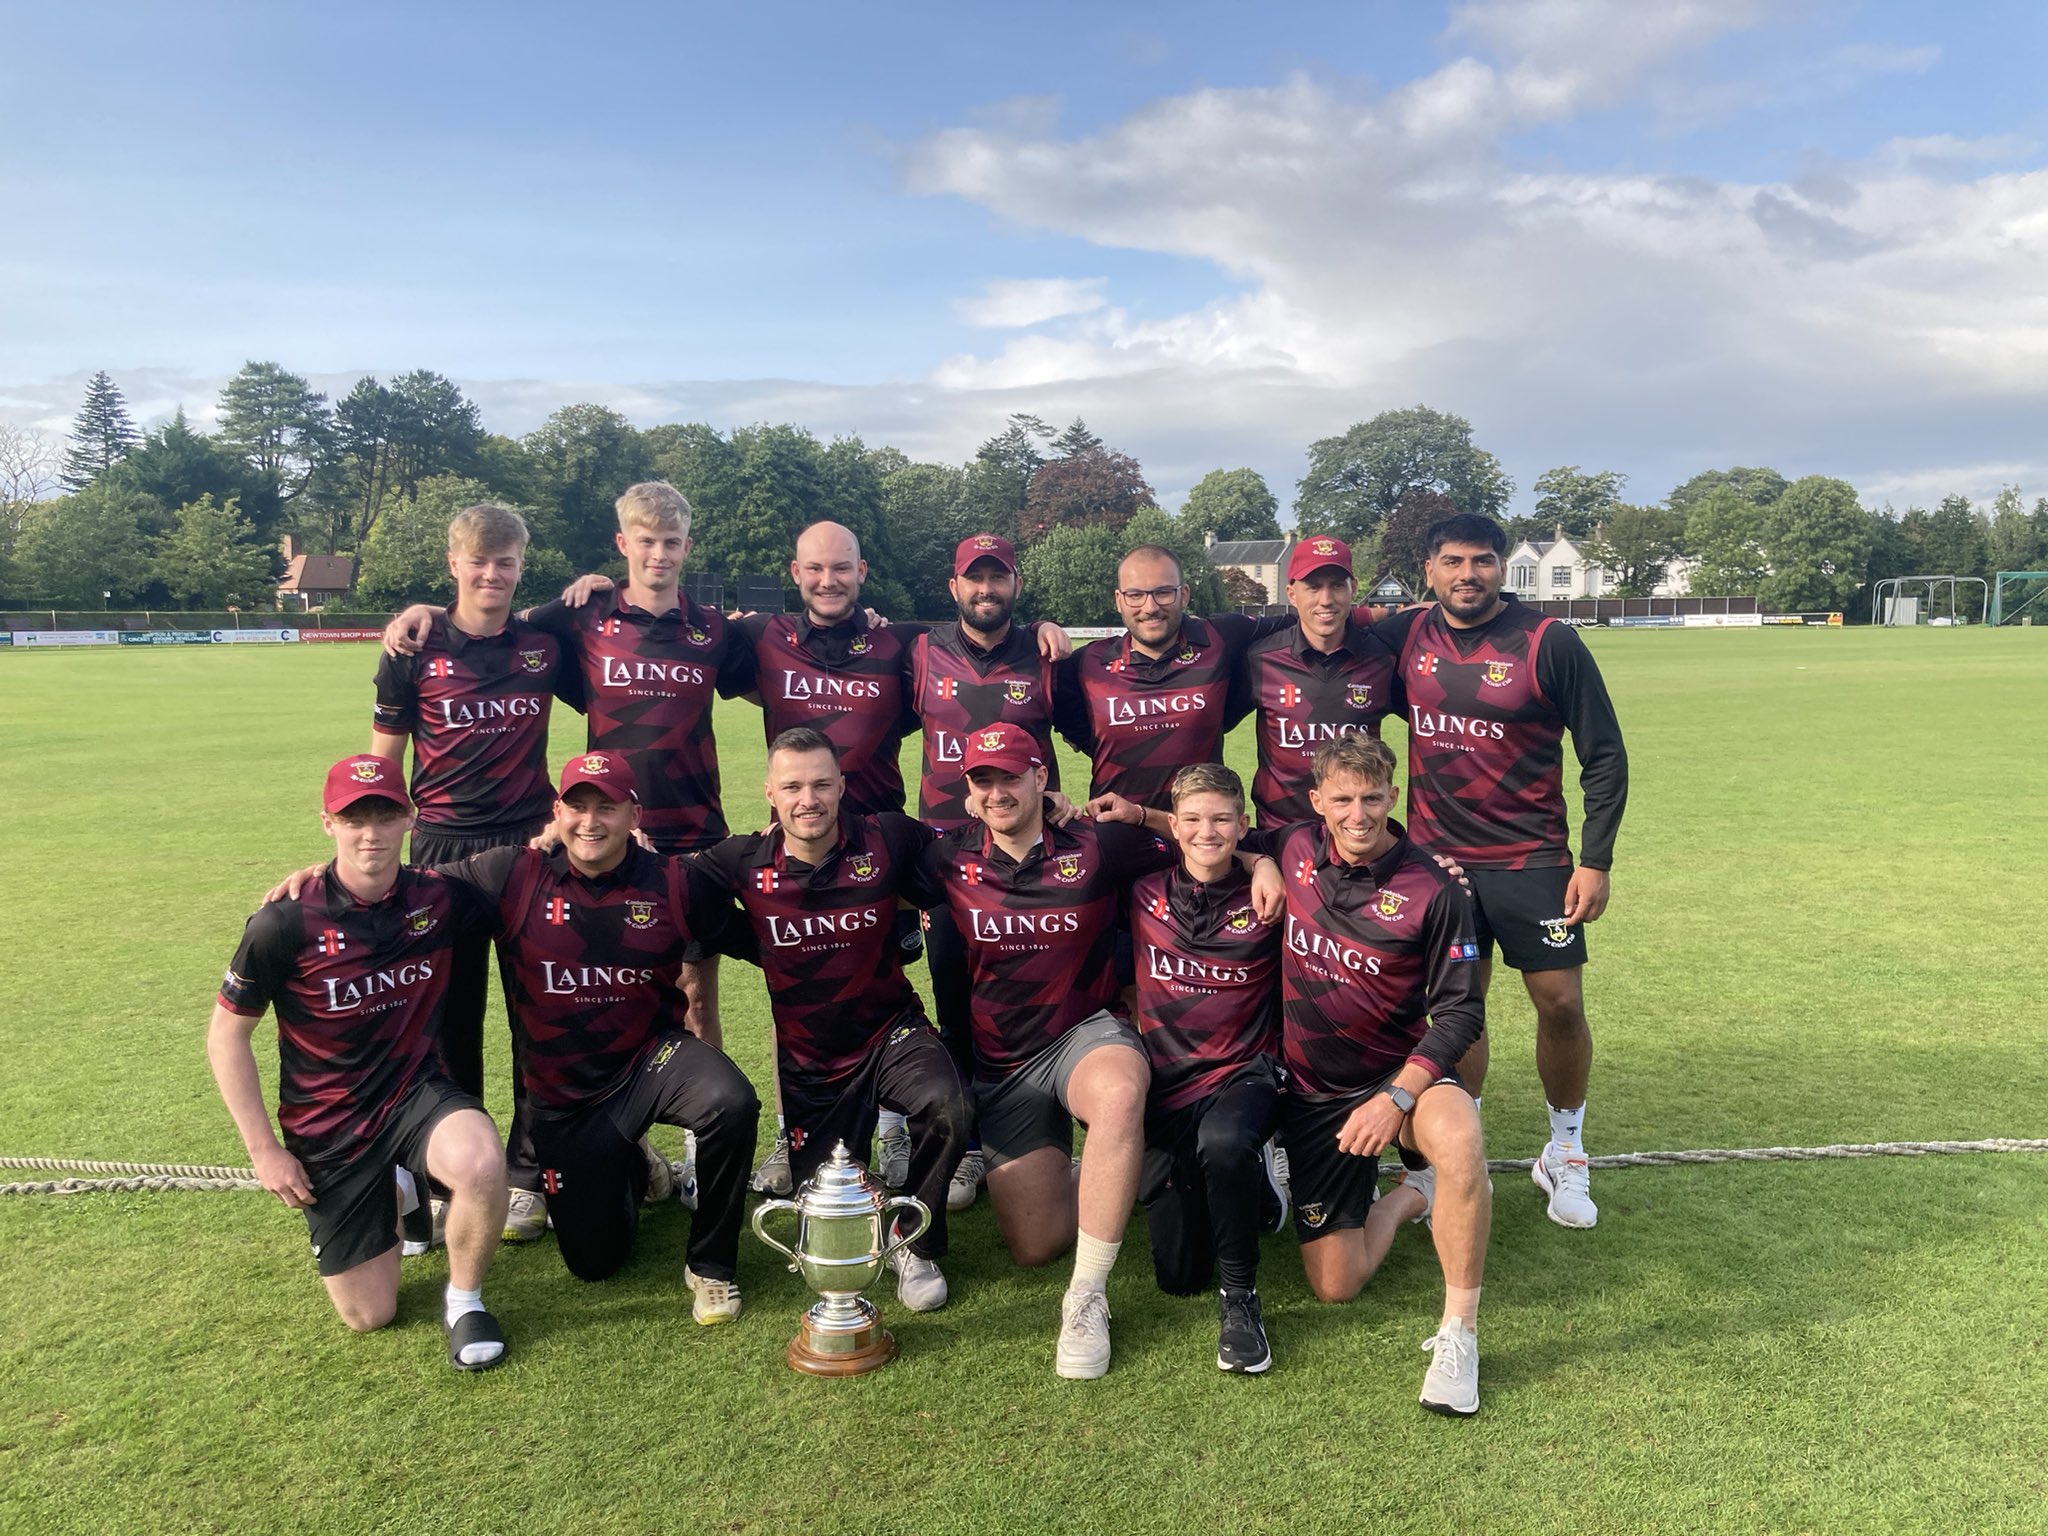 AYR AND GRANGE TO FIGHT IT OUT IN CRICKET SCOTLAND GRAND FINAL